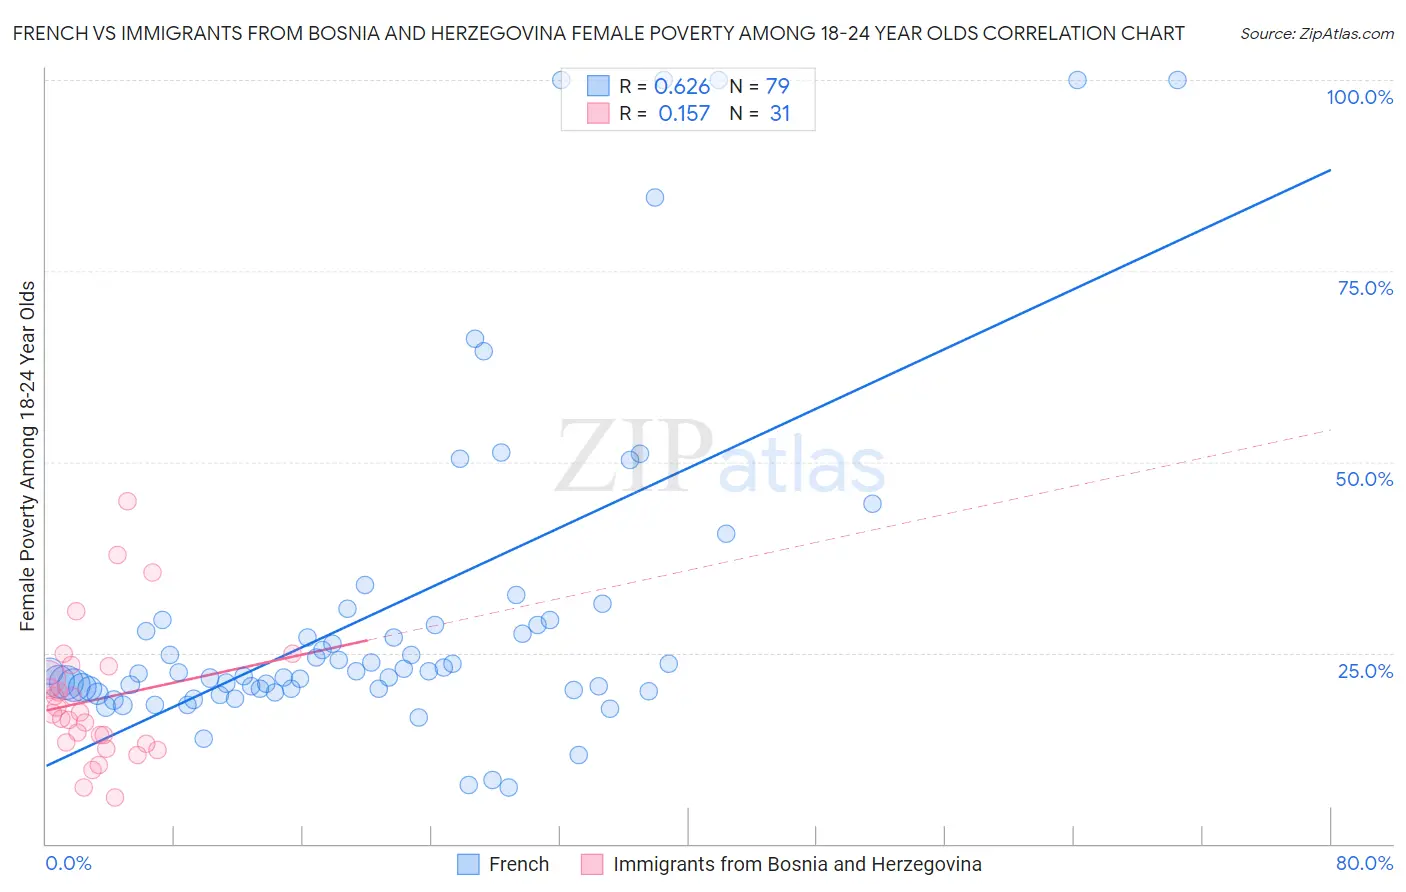 French vs Immigrants from Bosnia and Herzegovina Female Poverty Among 18-24 Year Olds